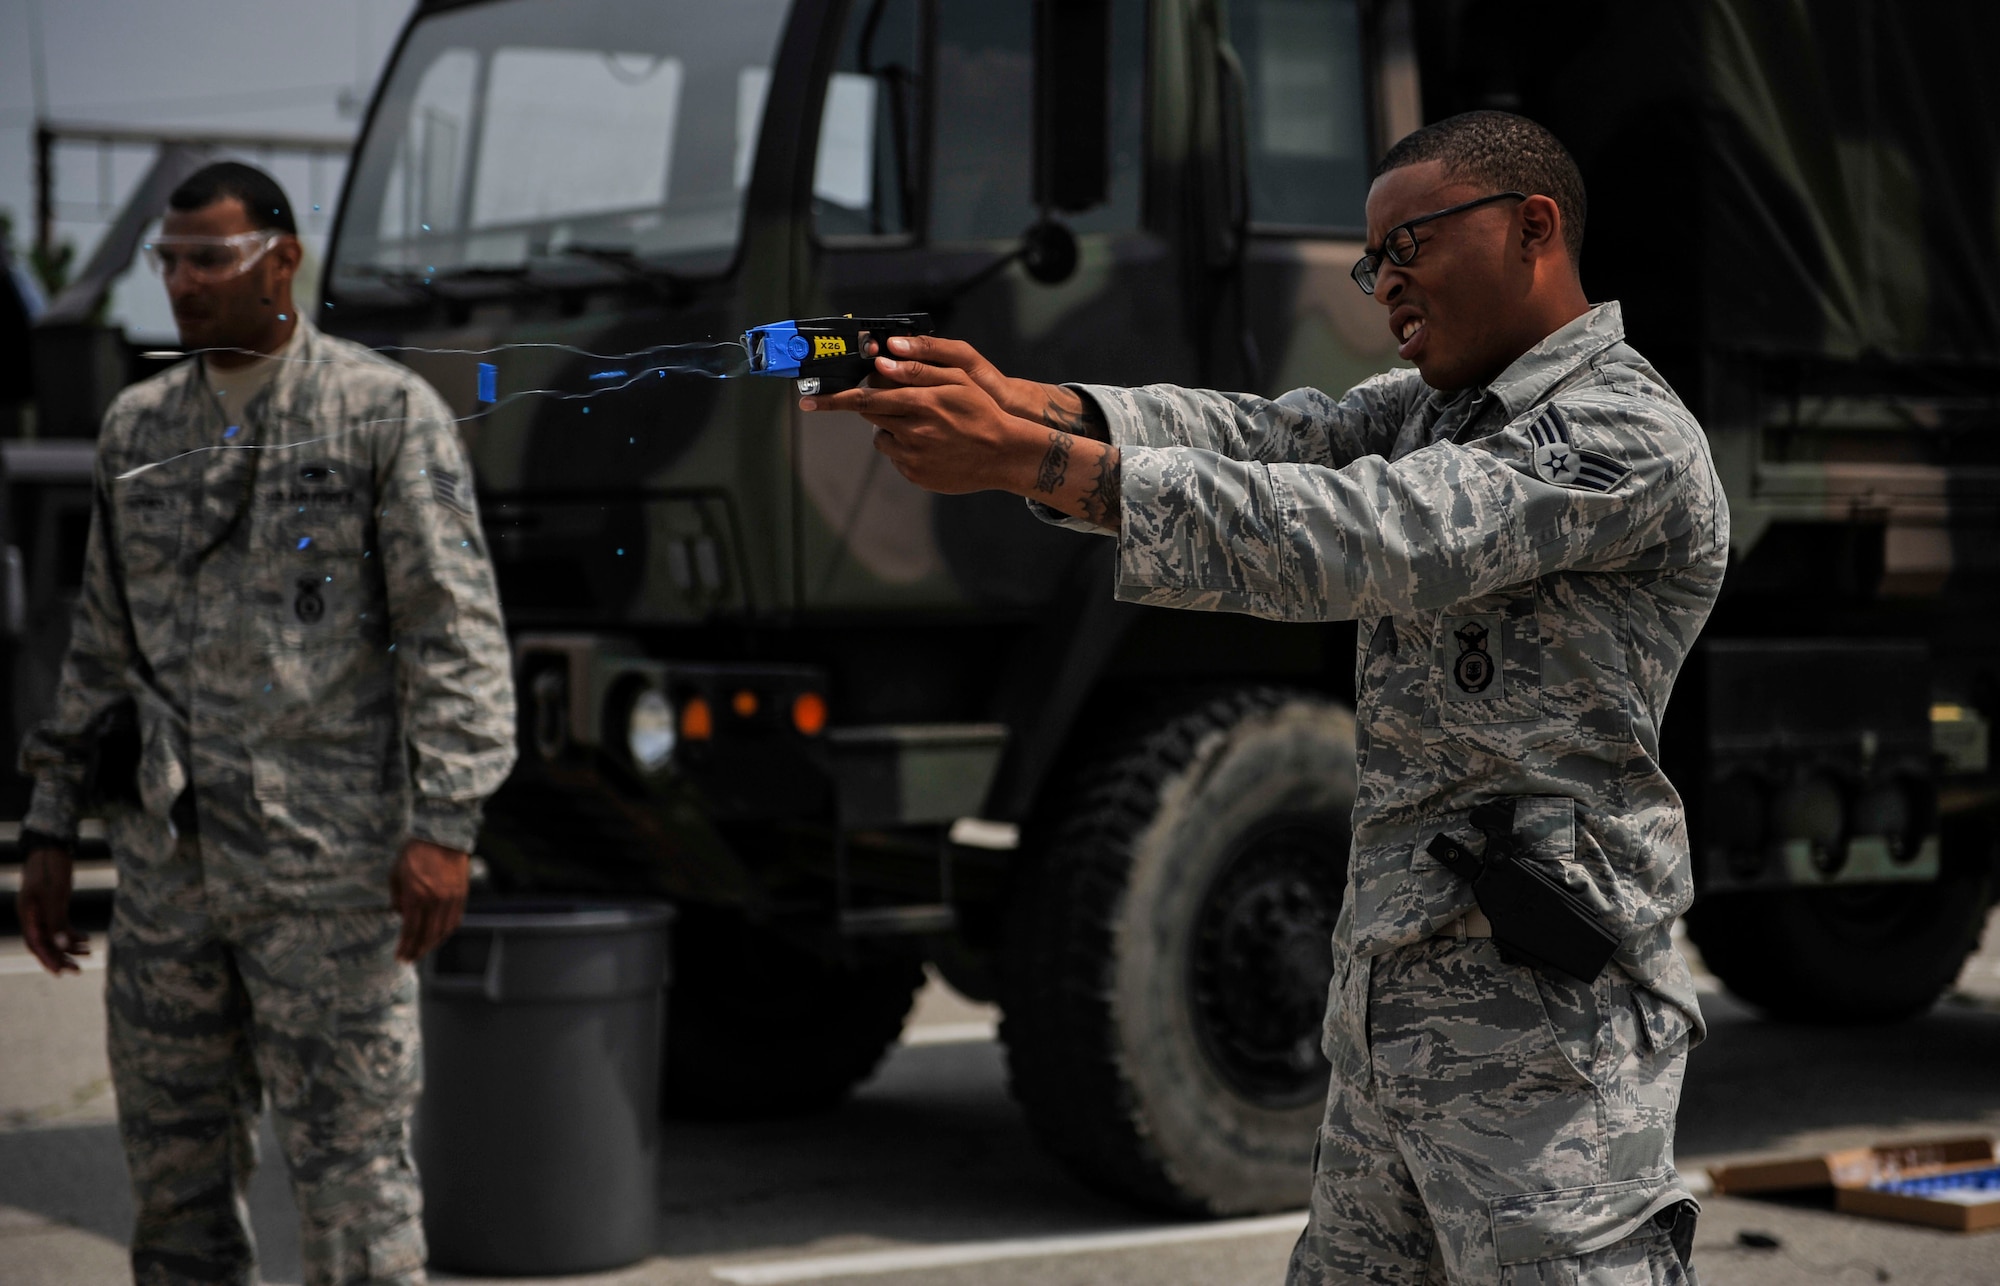 Senior Airman Marcus Thomas fires a Taser during training June 27, 2014, on Osan Air Base, Republic of Korea. The Taser fires two small dart-like electrodes which stay connected to the main unit by conductive wire while being propelled by small compressed nitrogen charges. Thomas is a 51st Security Forces Squadron entry controller. (U.S. Air Force photo/Senior Airman David Owsianka)